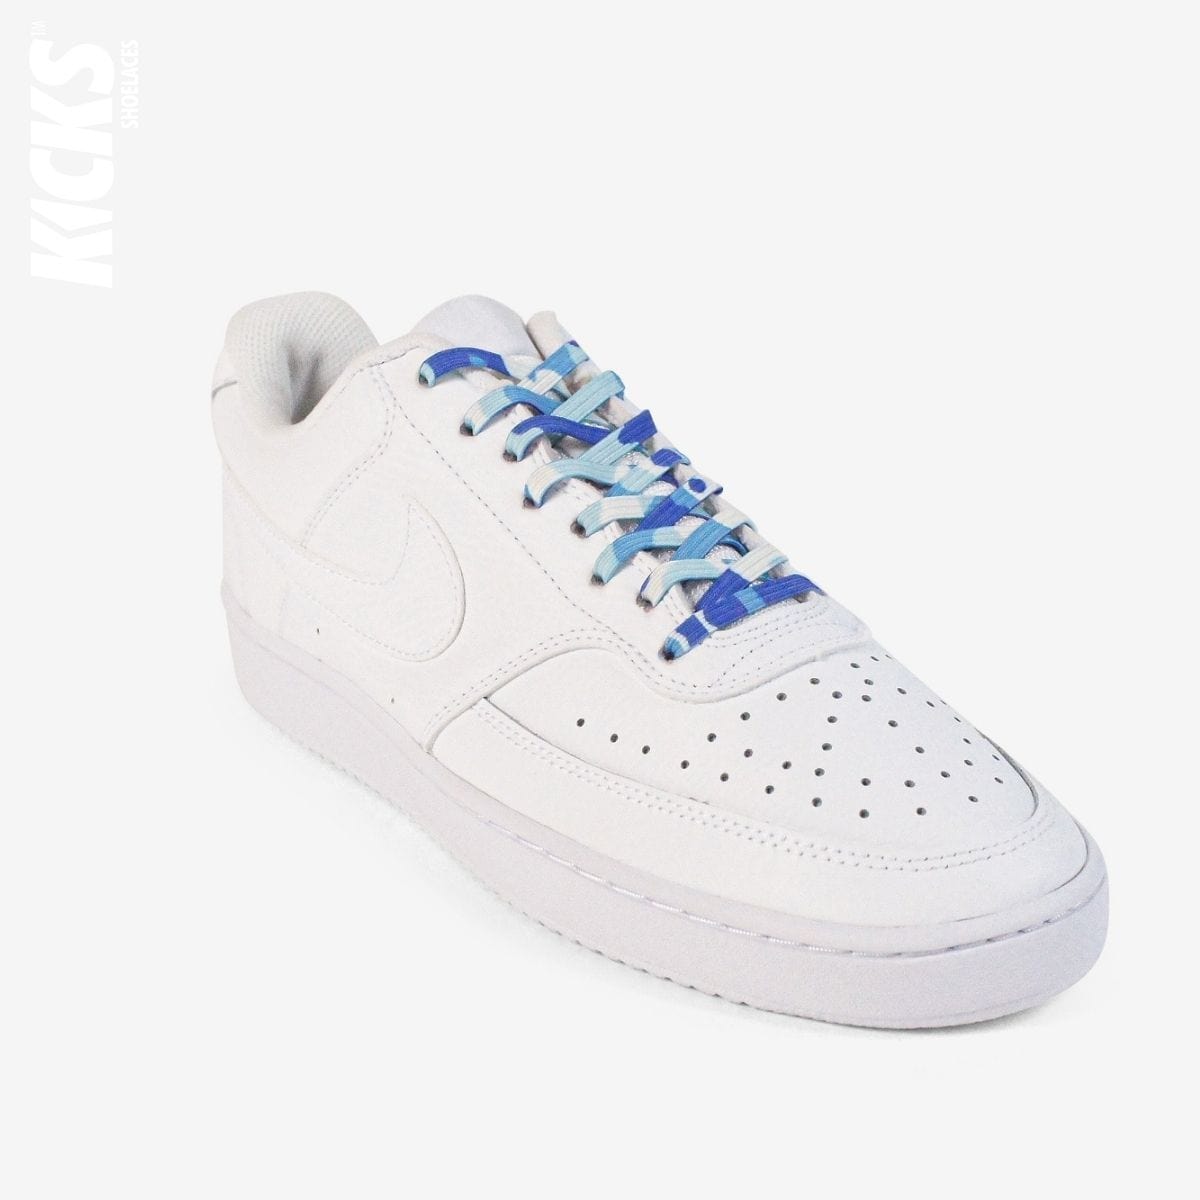 elastic-no-tie-shoelaces-with-blue-camo-laces-on-nike-white-sneakers